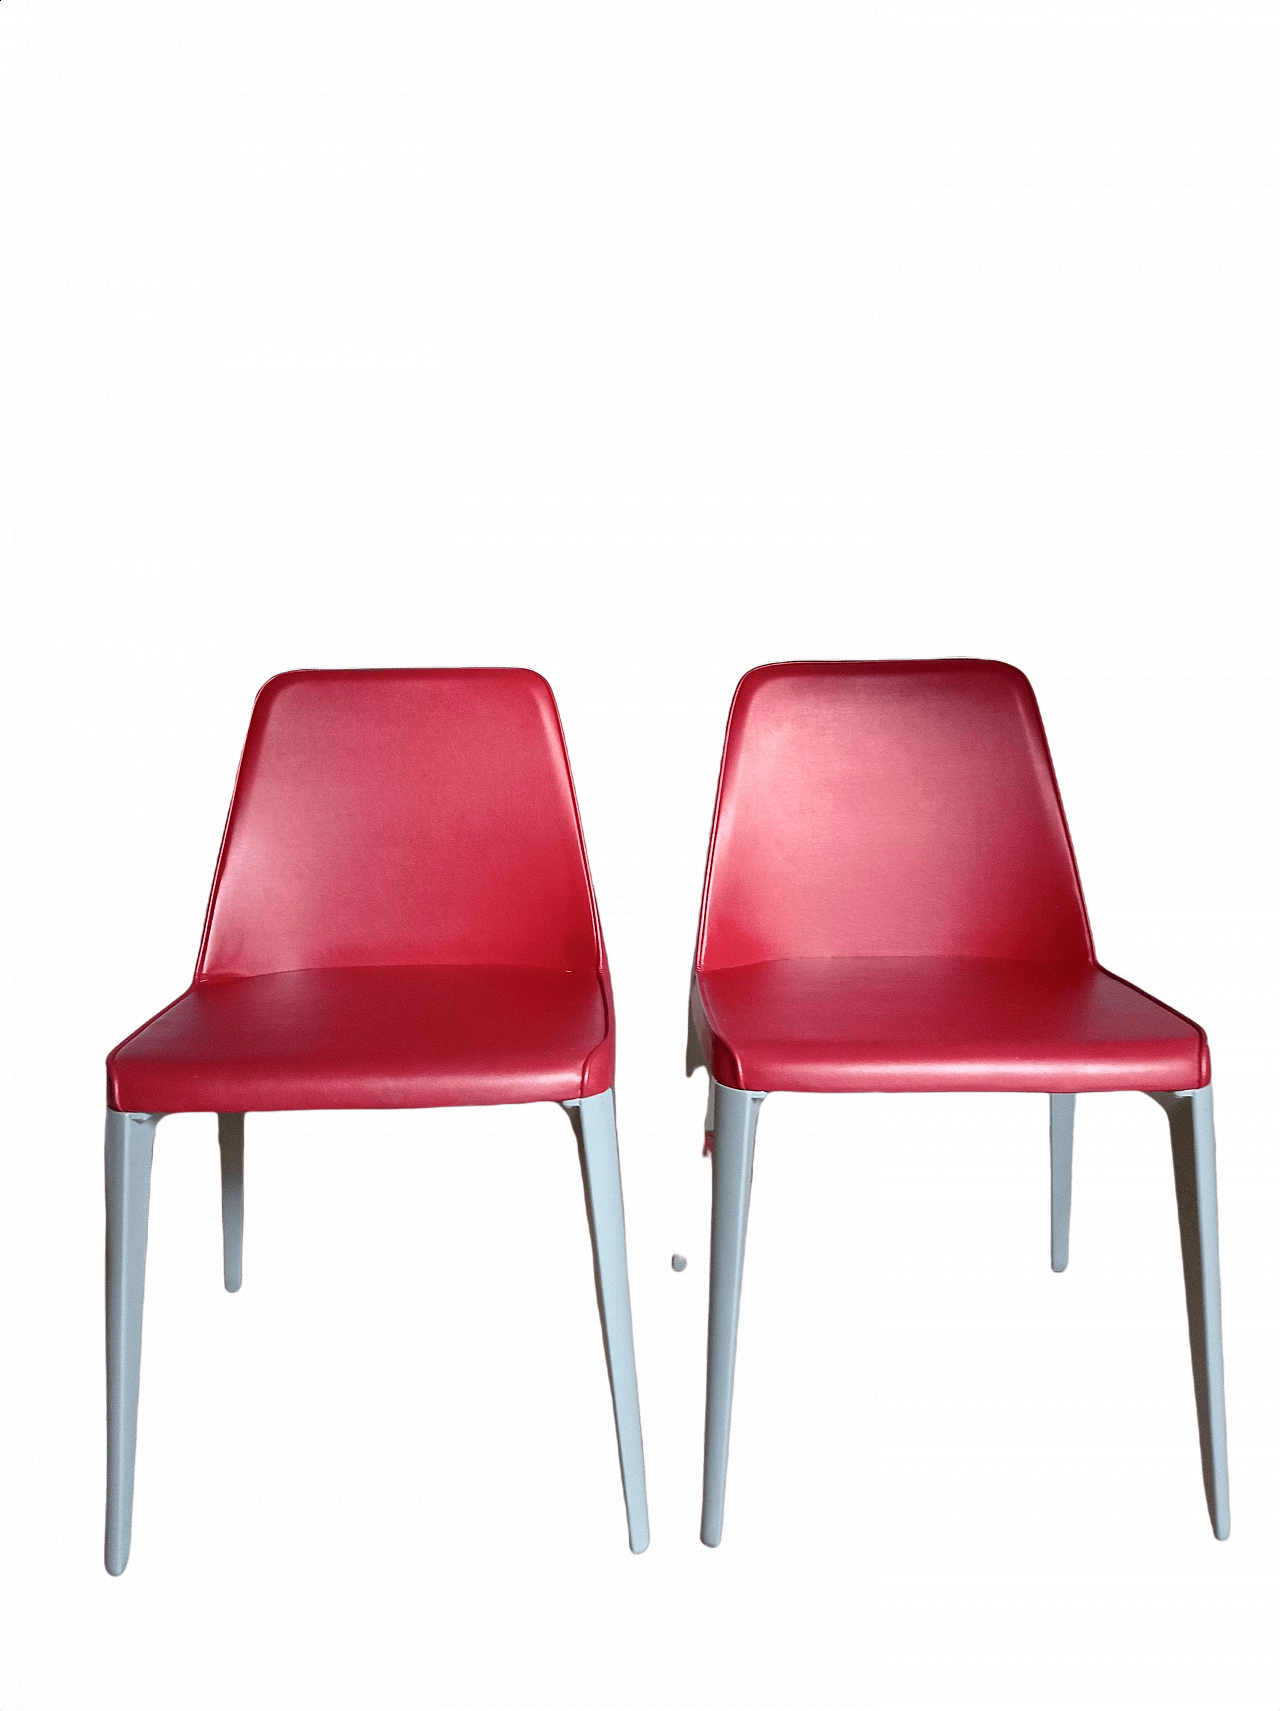 Pair of Ester Basic 691 chairs in leather by Patrick Jouin for Pedrali 1447464